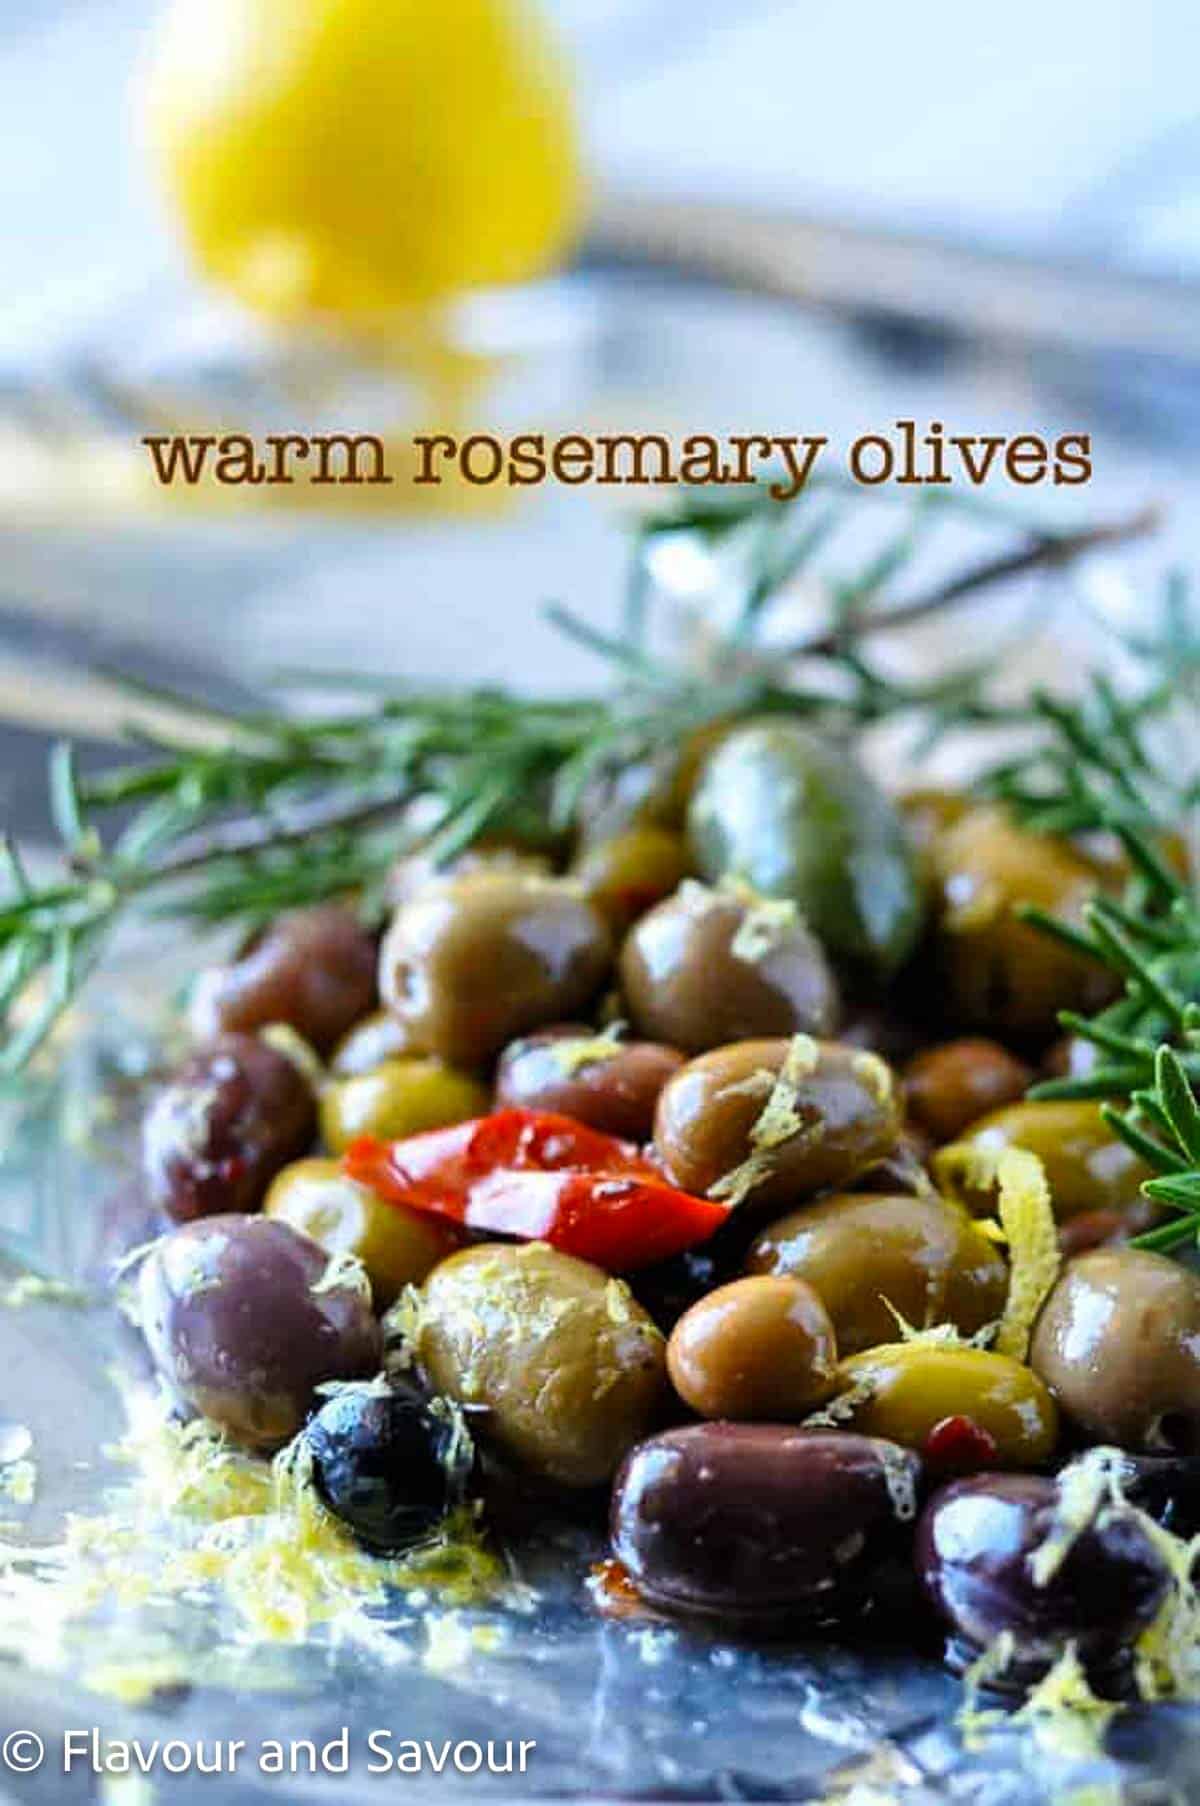 Warm rosemary olives with title text.